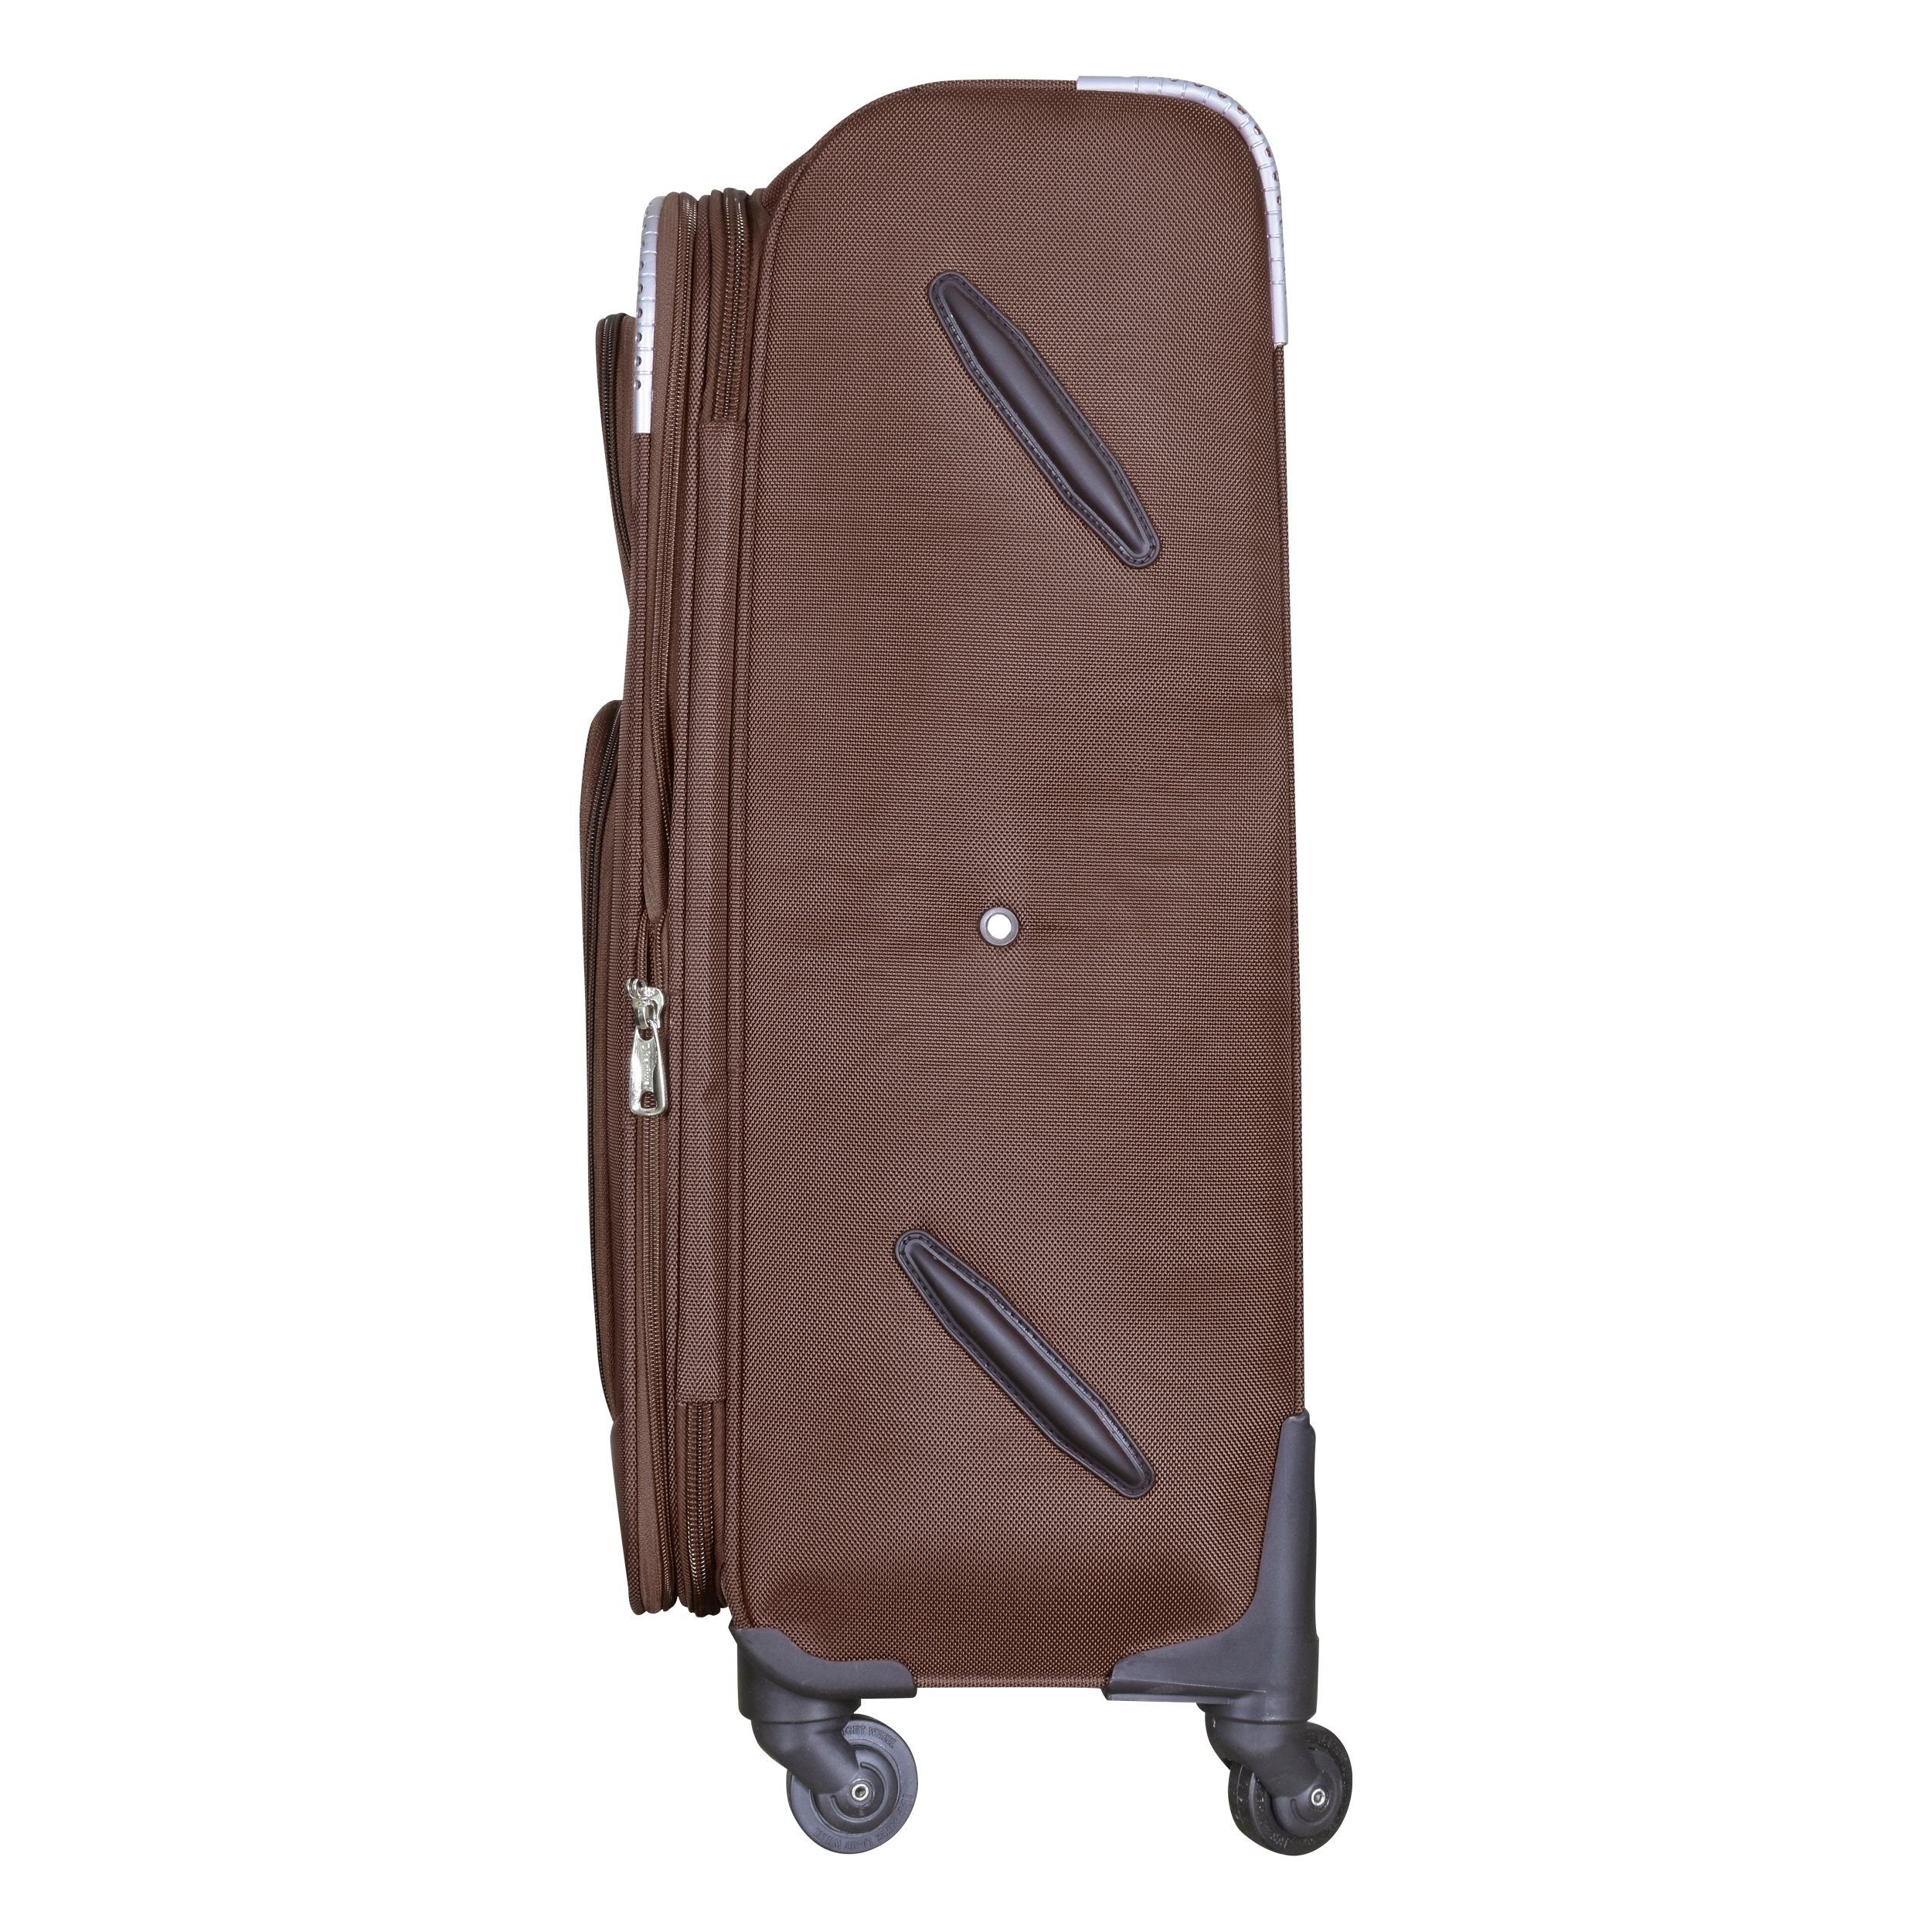 Update more than 64 skybags 24 inch trolley bag best - in.duhocakina